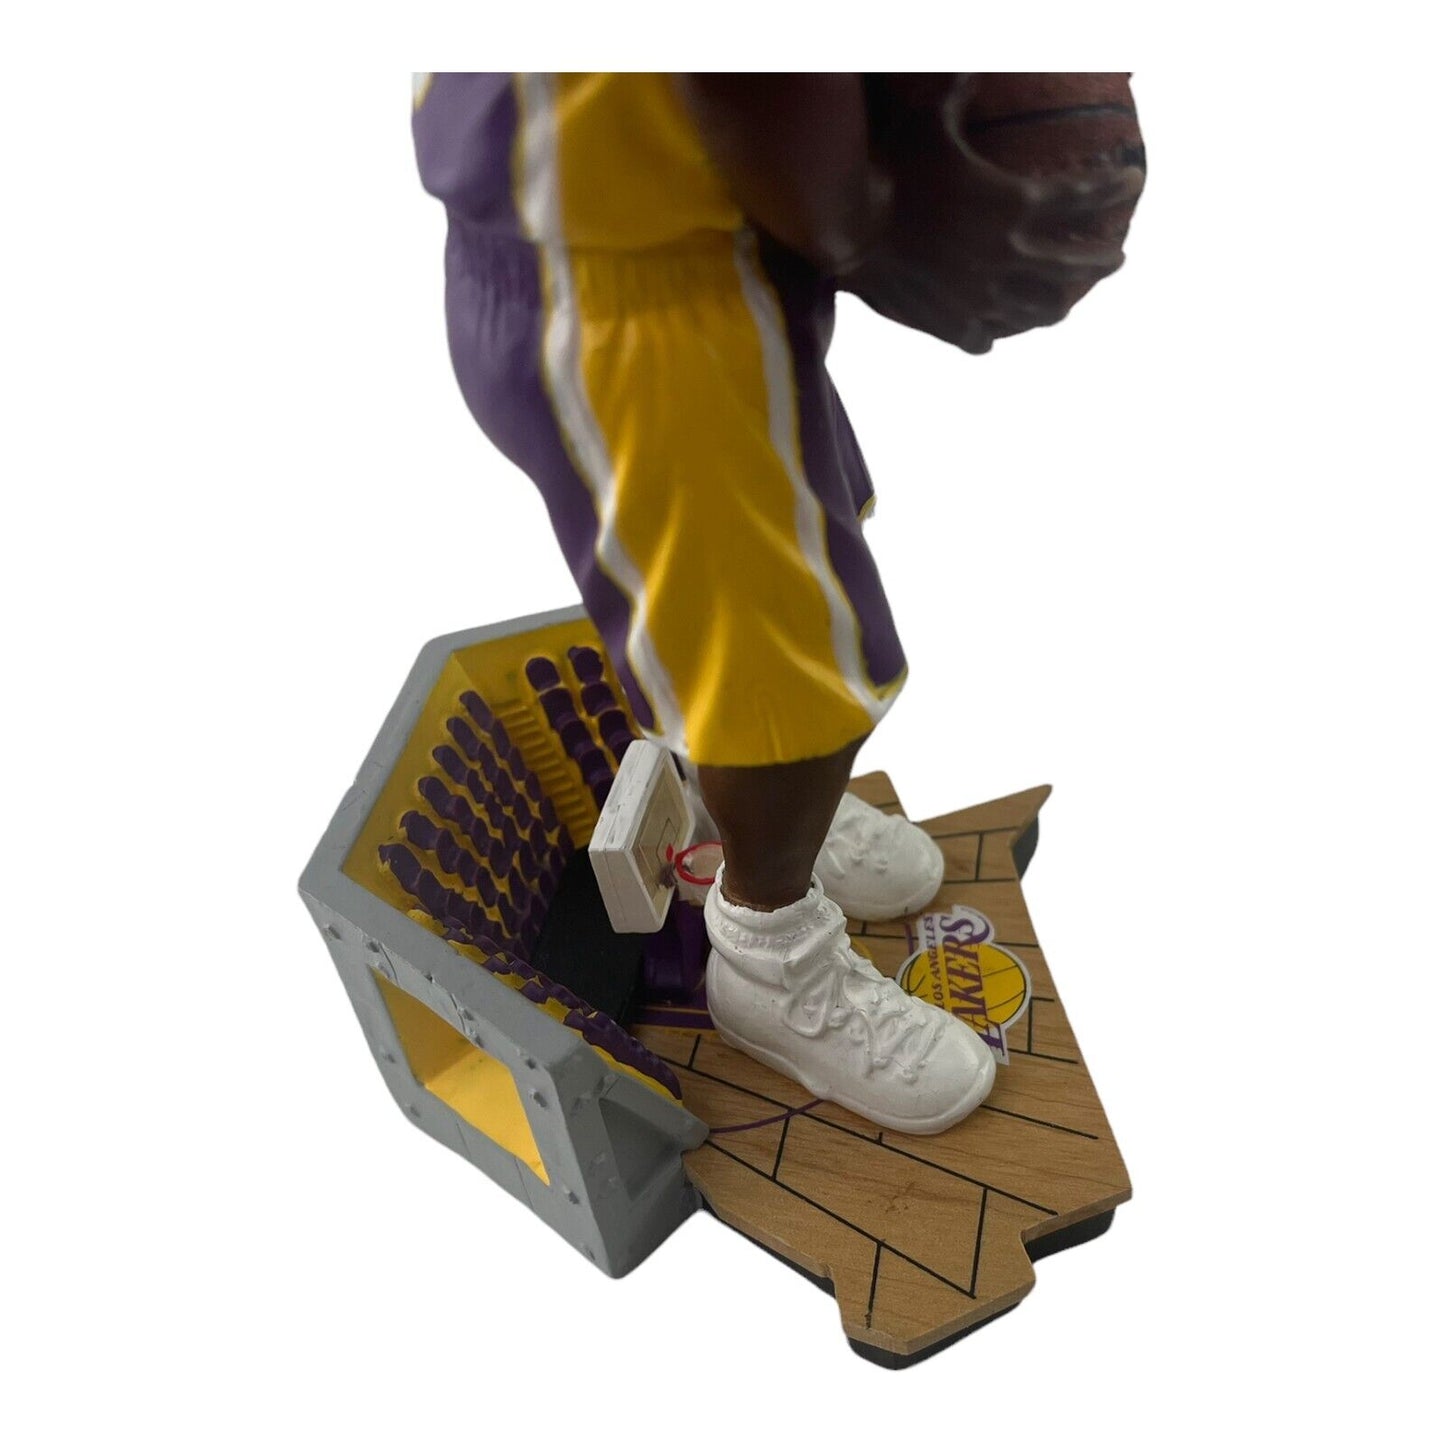 NBA Legends of the Court Kobe Bryant 10 Inch Bobble Head Los Angeles Lakers